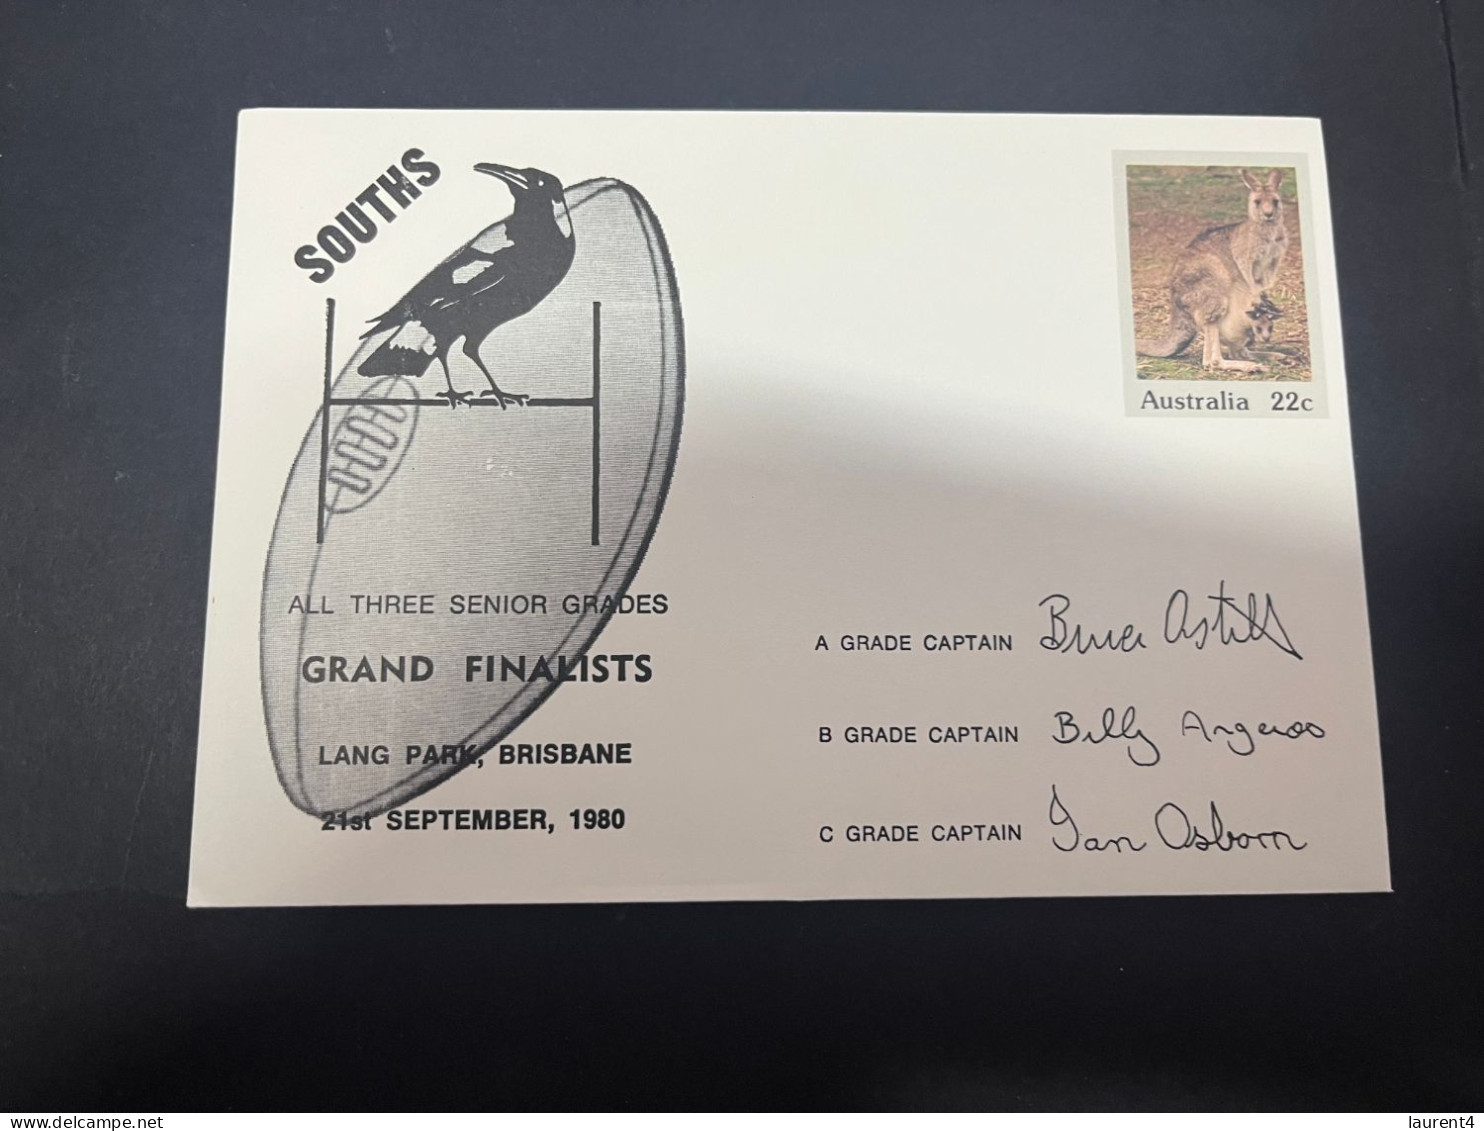 1-5-2023 (3 Z 39) Australia FDC (1 Covers) 1980 - OZ Football - South (magpies) Grand Finalists (signed - Kangaroo) - Primo Giorno D'emissione (FDC)